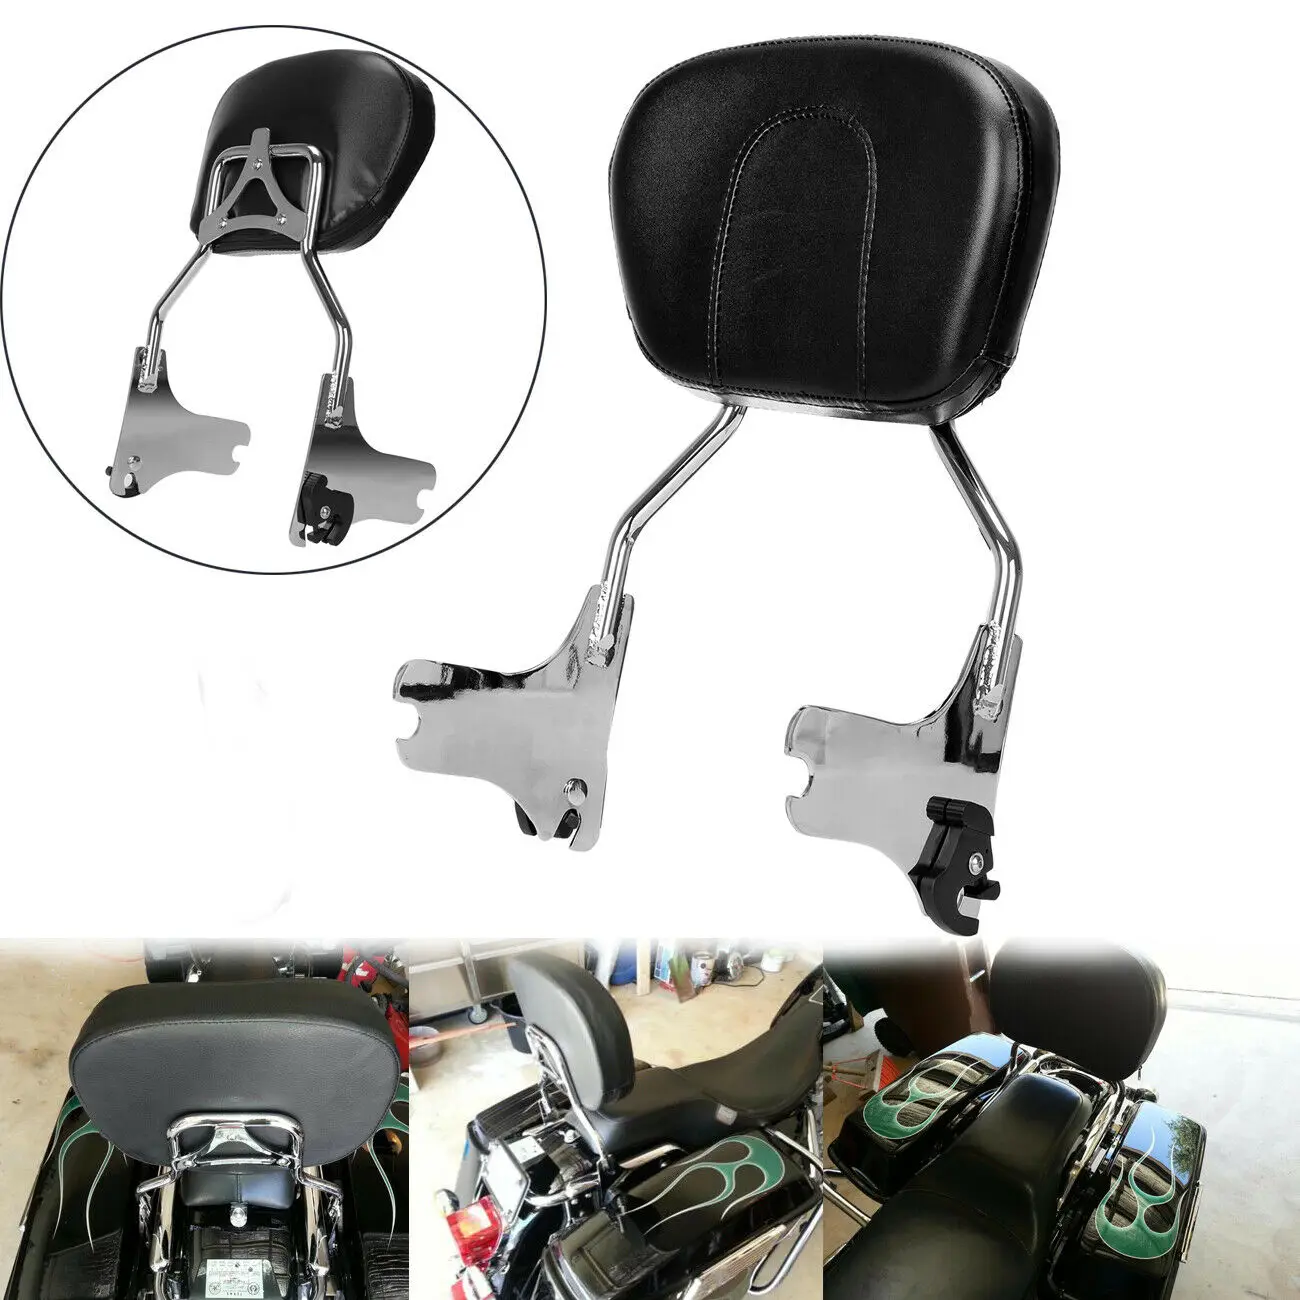 

Motorcycle Chrome Backrest Sissy Bar Passenger Pad Detachable Support For Harley Touring Road King Electra Glide FLHR 1997-2008